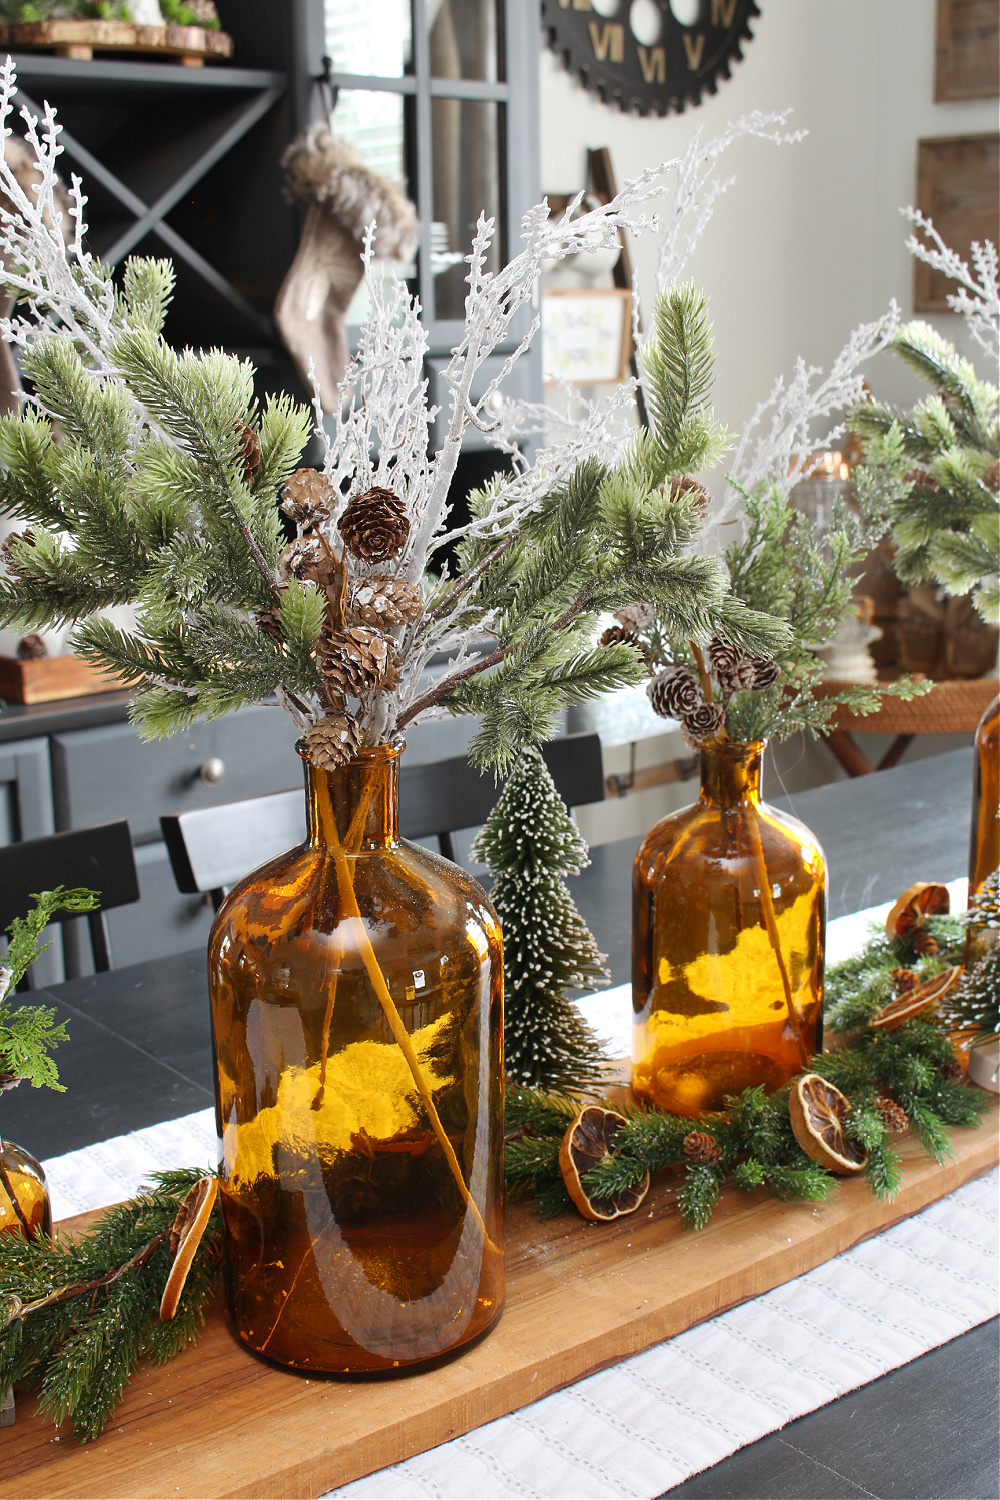 Amber glass and green Christmas centerpiece.